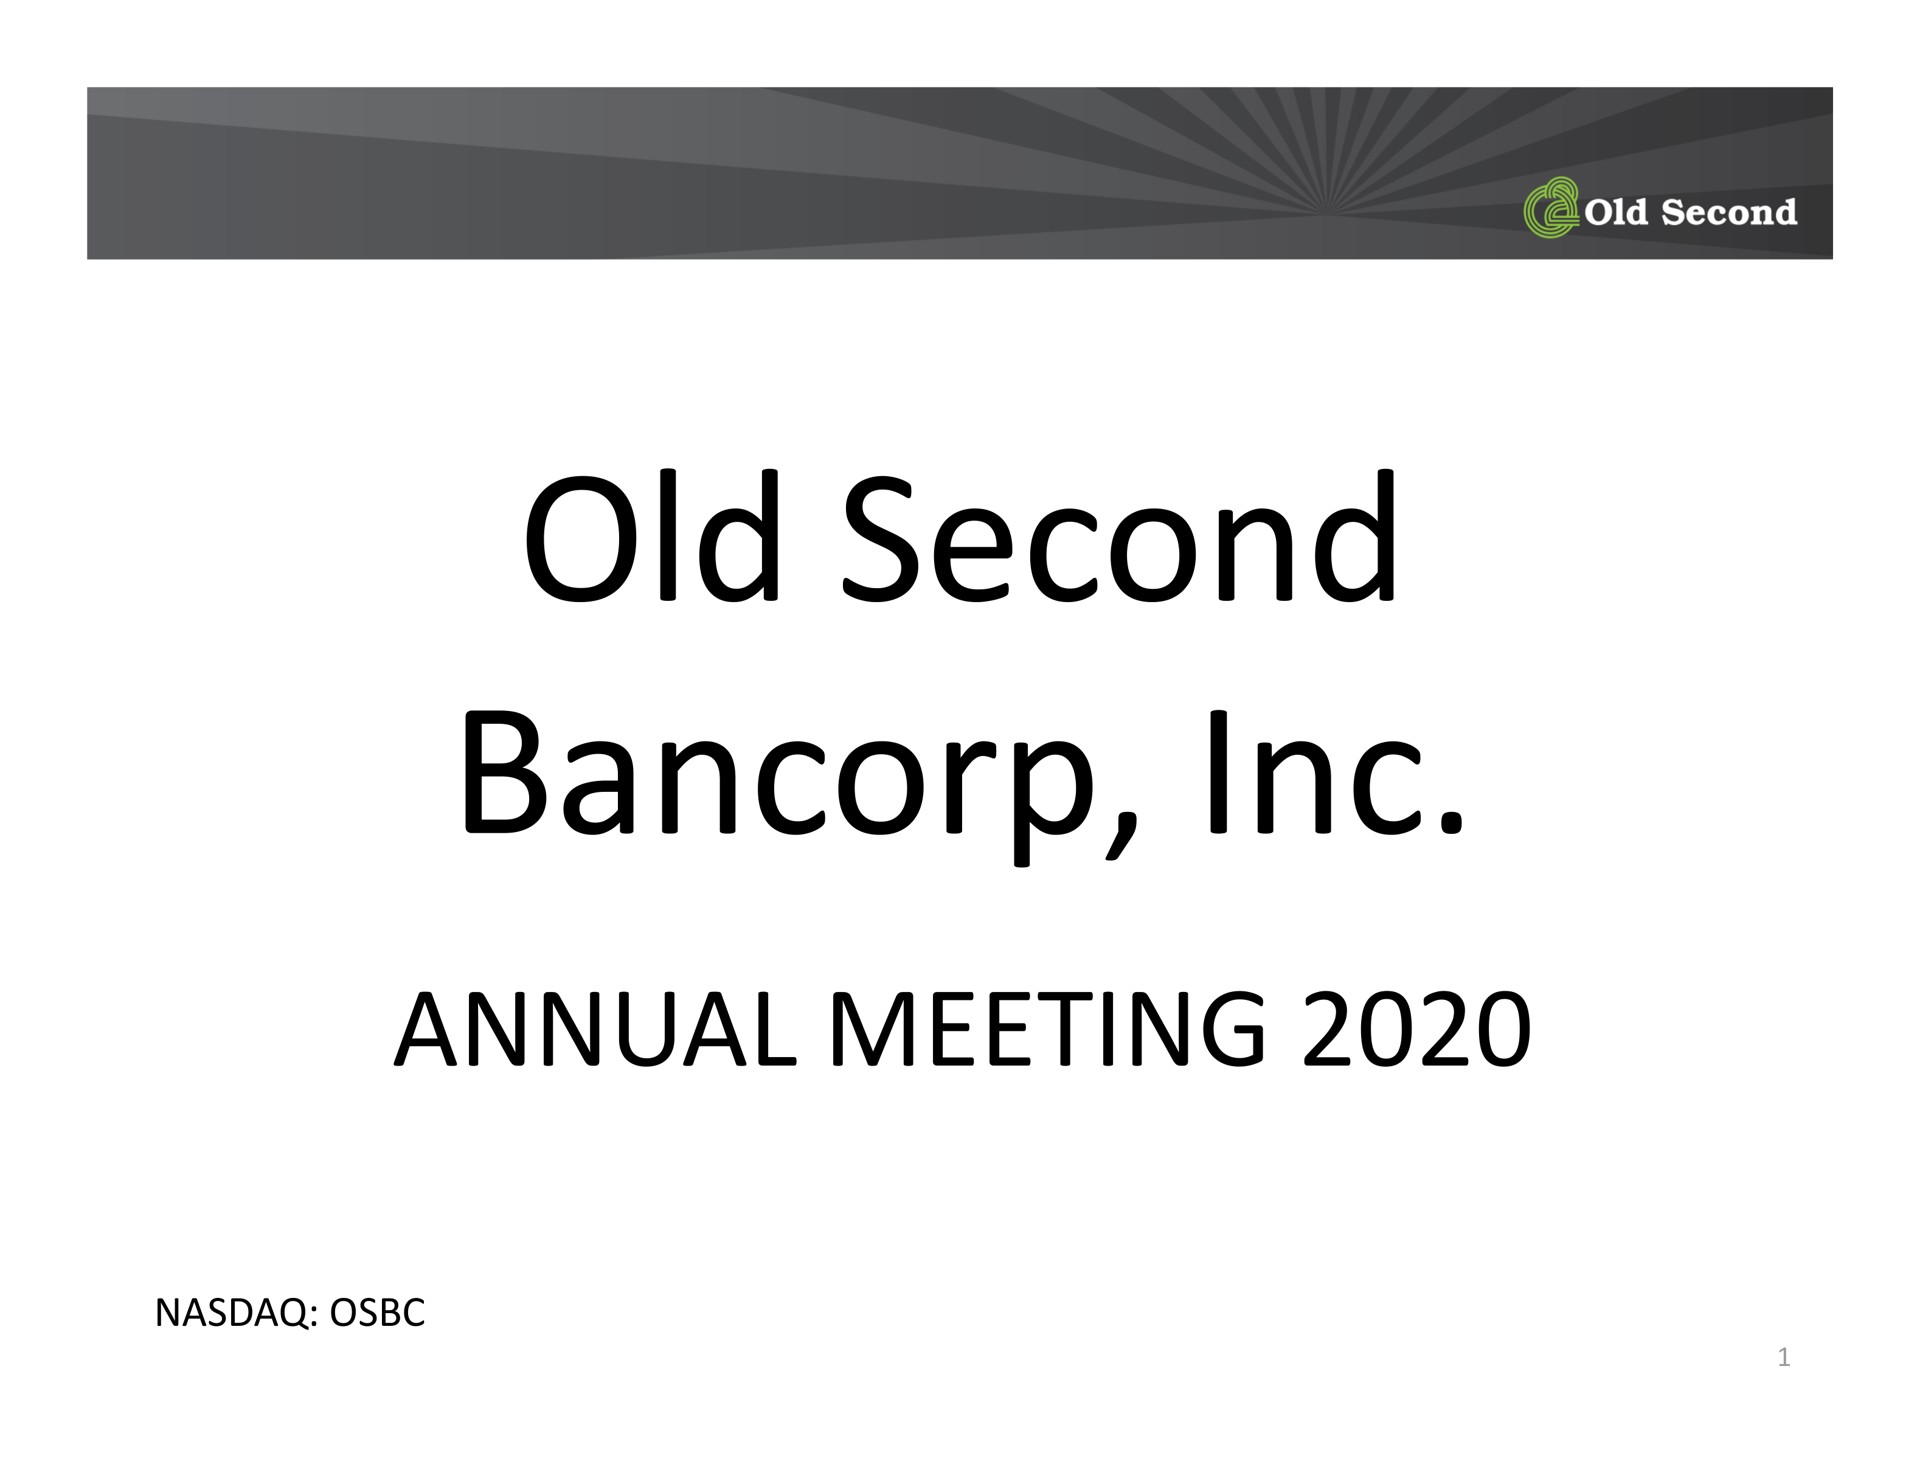 old second annual meeting | Old Second Bancorp